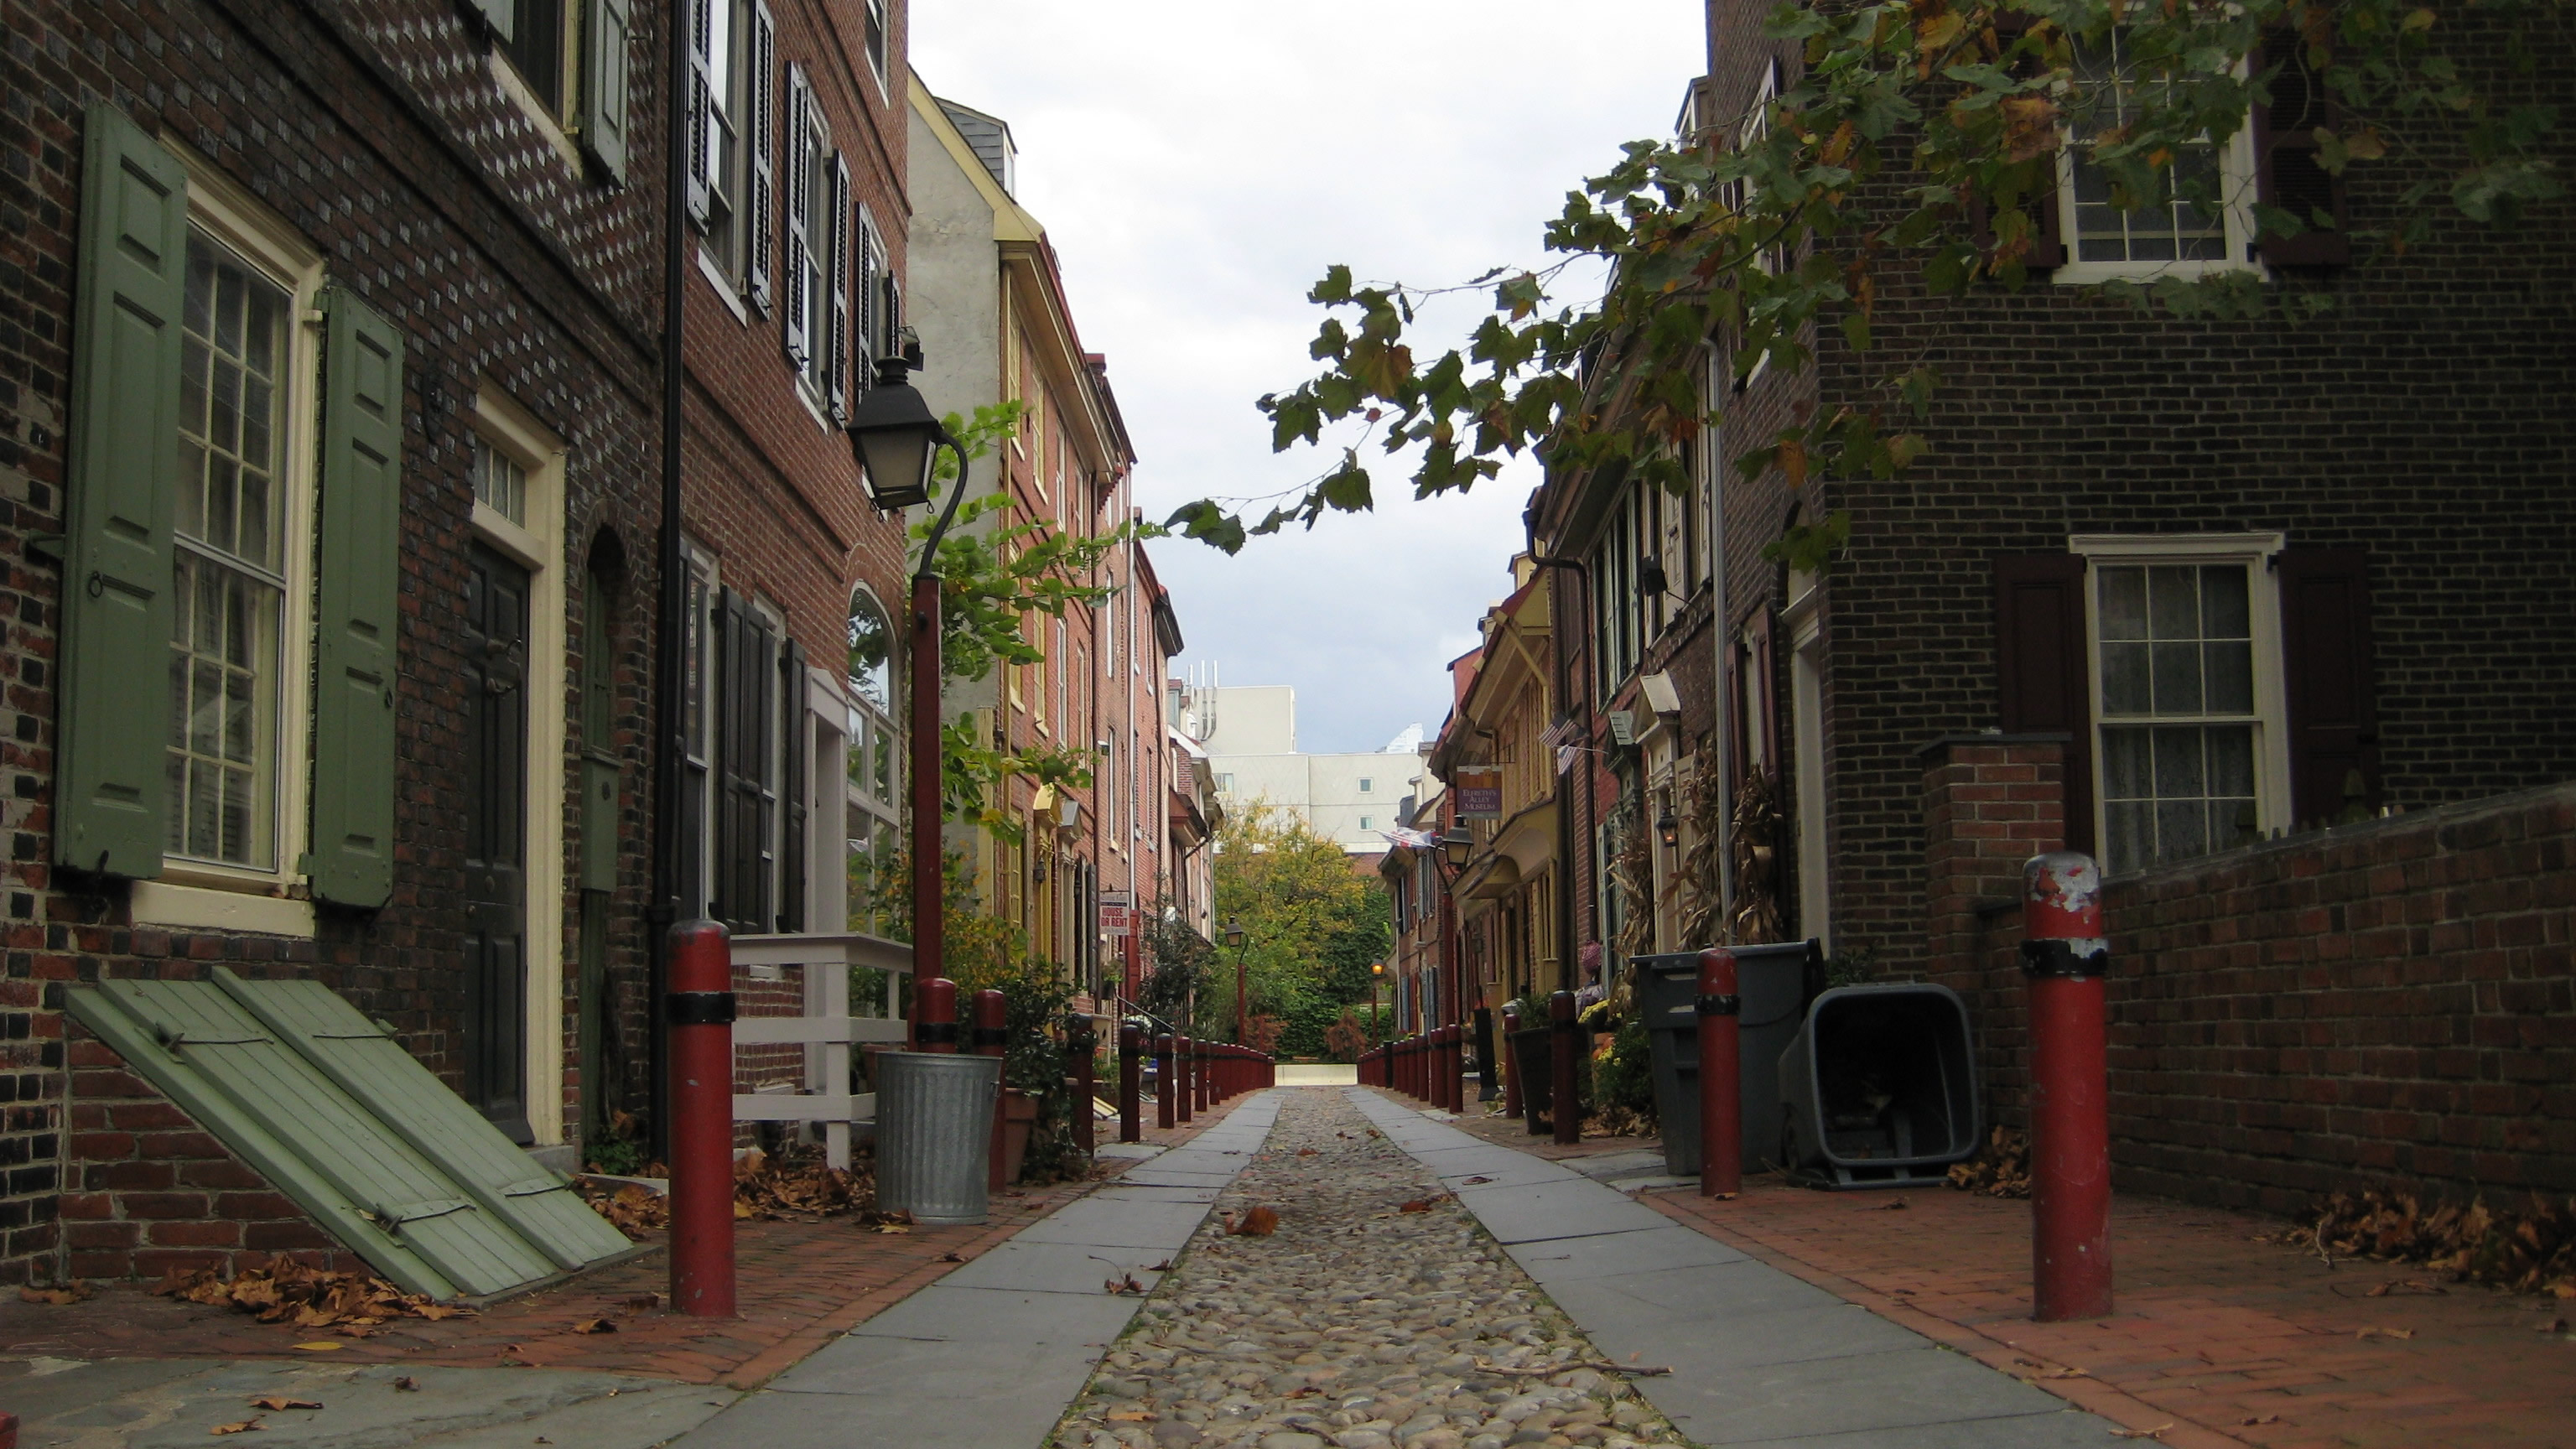 Panoramic view of Elfreth's Alley looking east